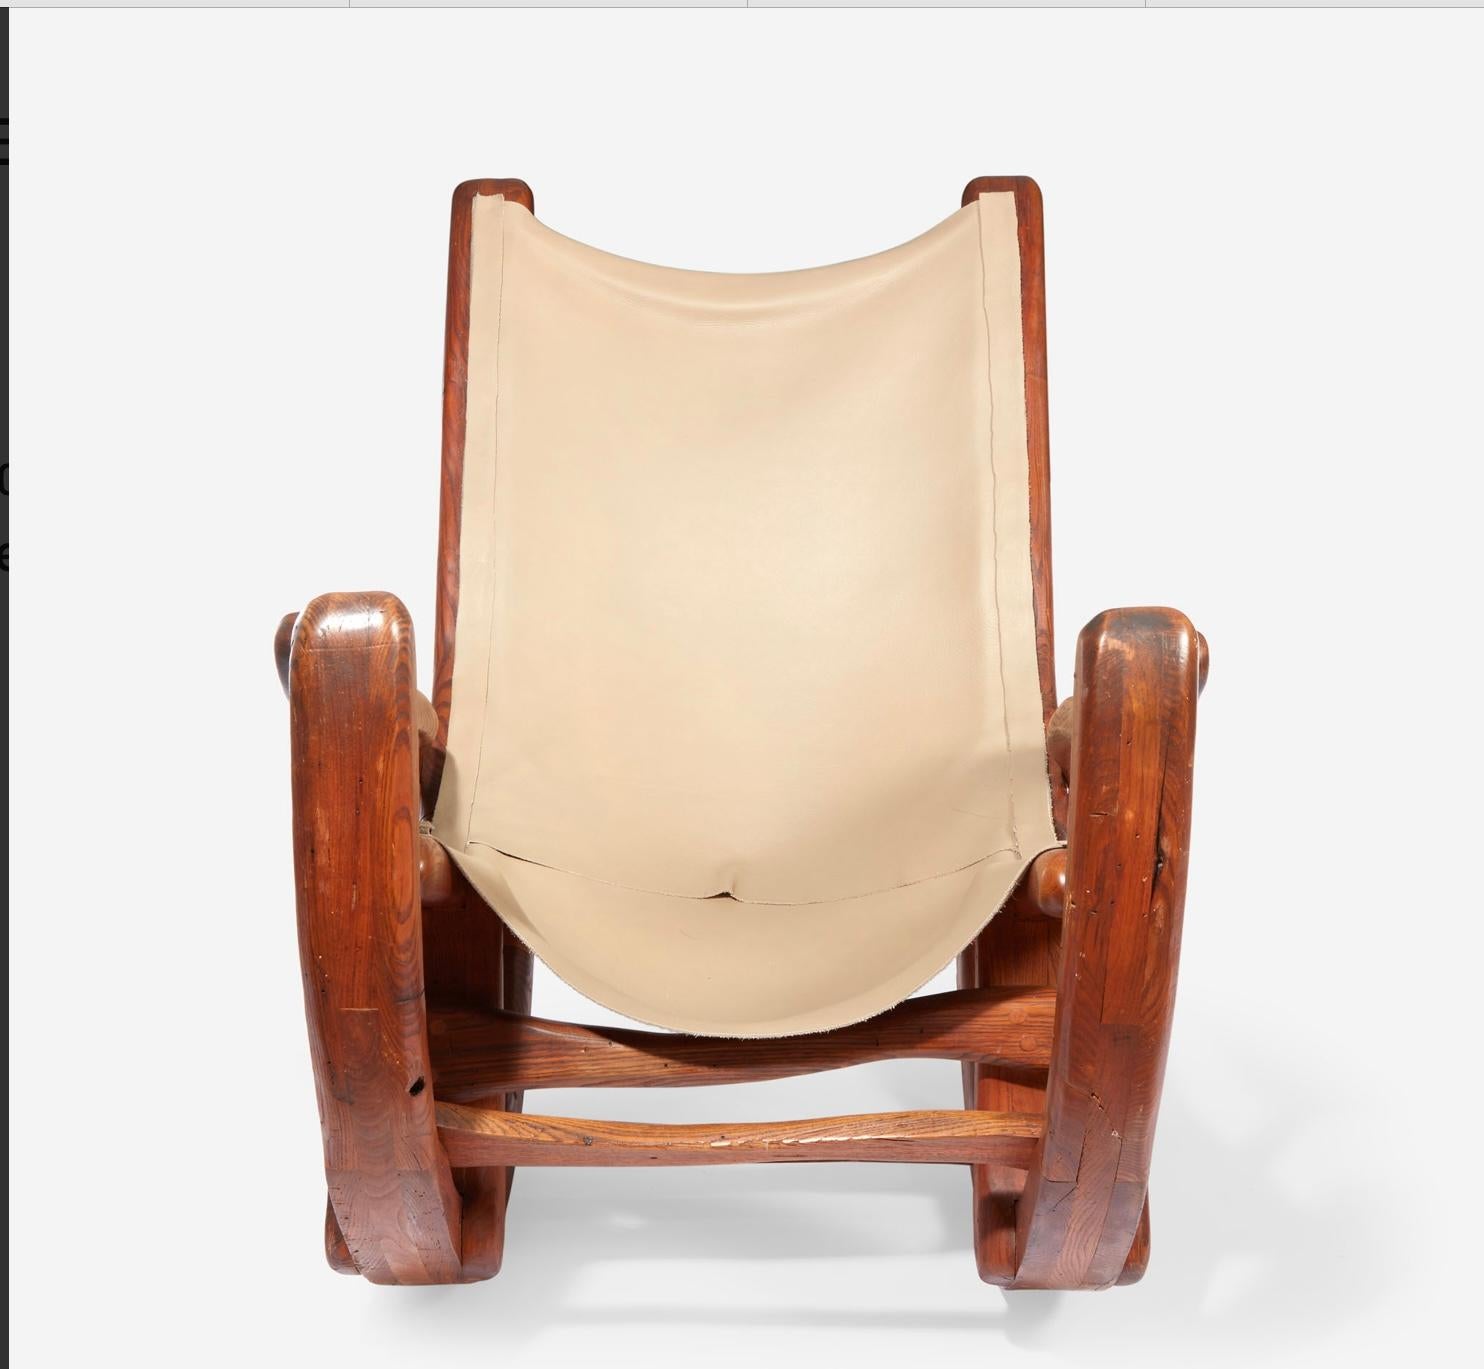 Michael Costerisan Rocking Chair, 1973 For Sale 11